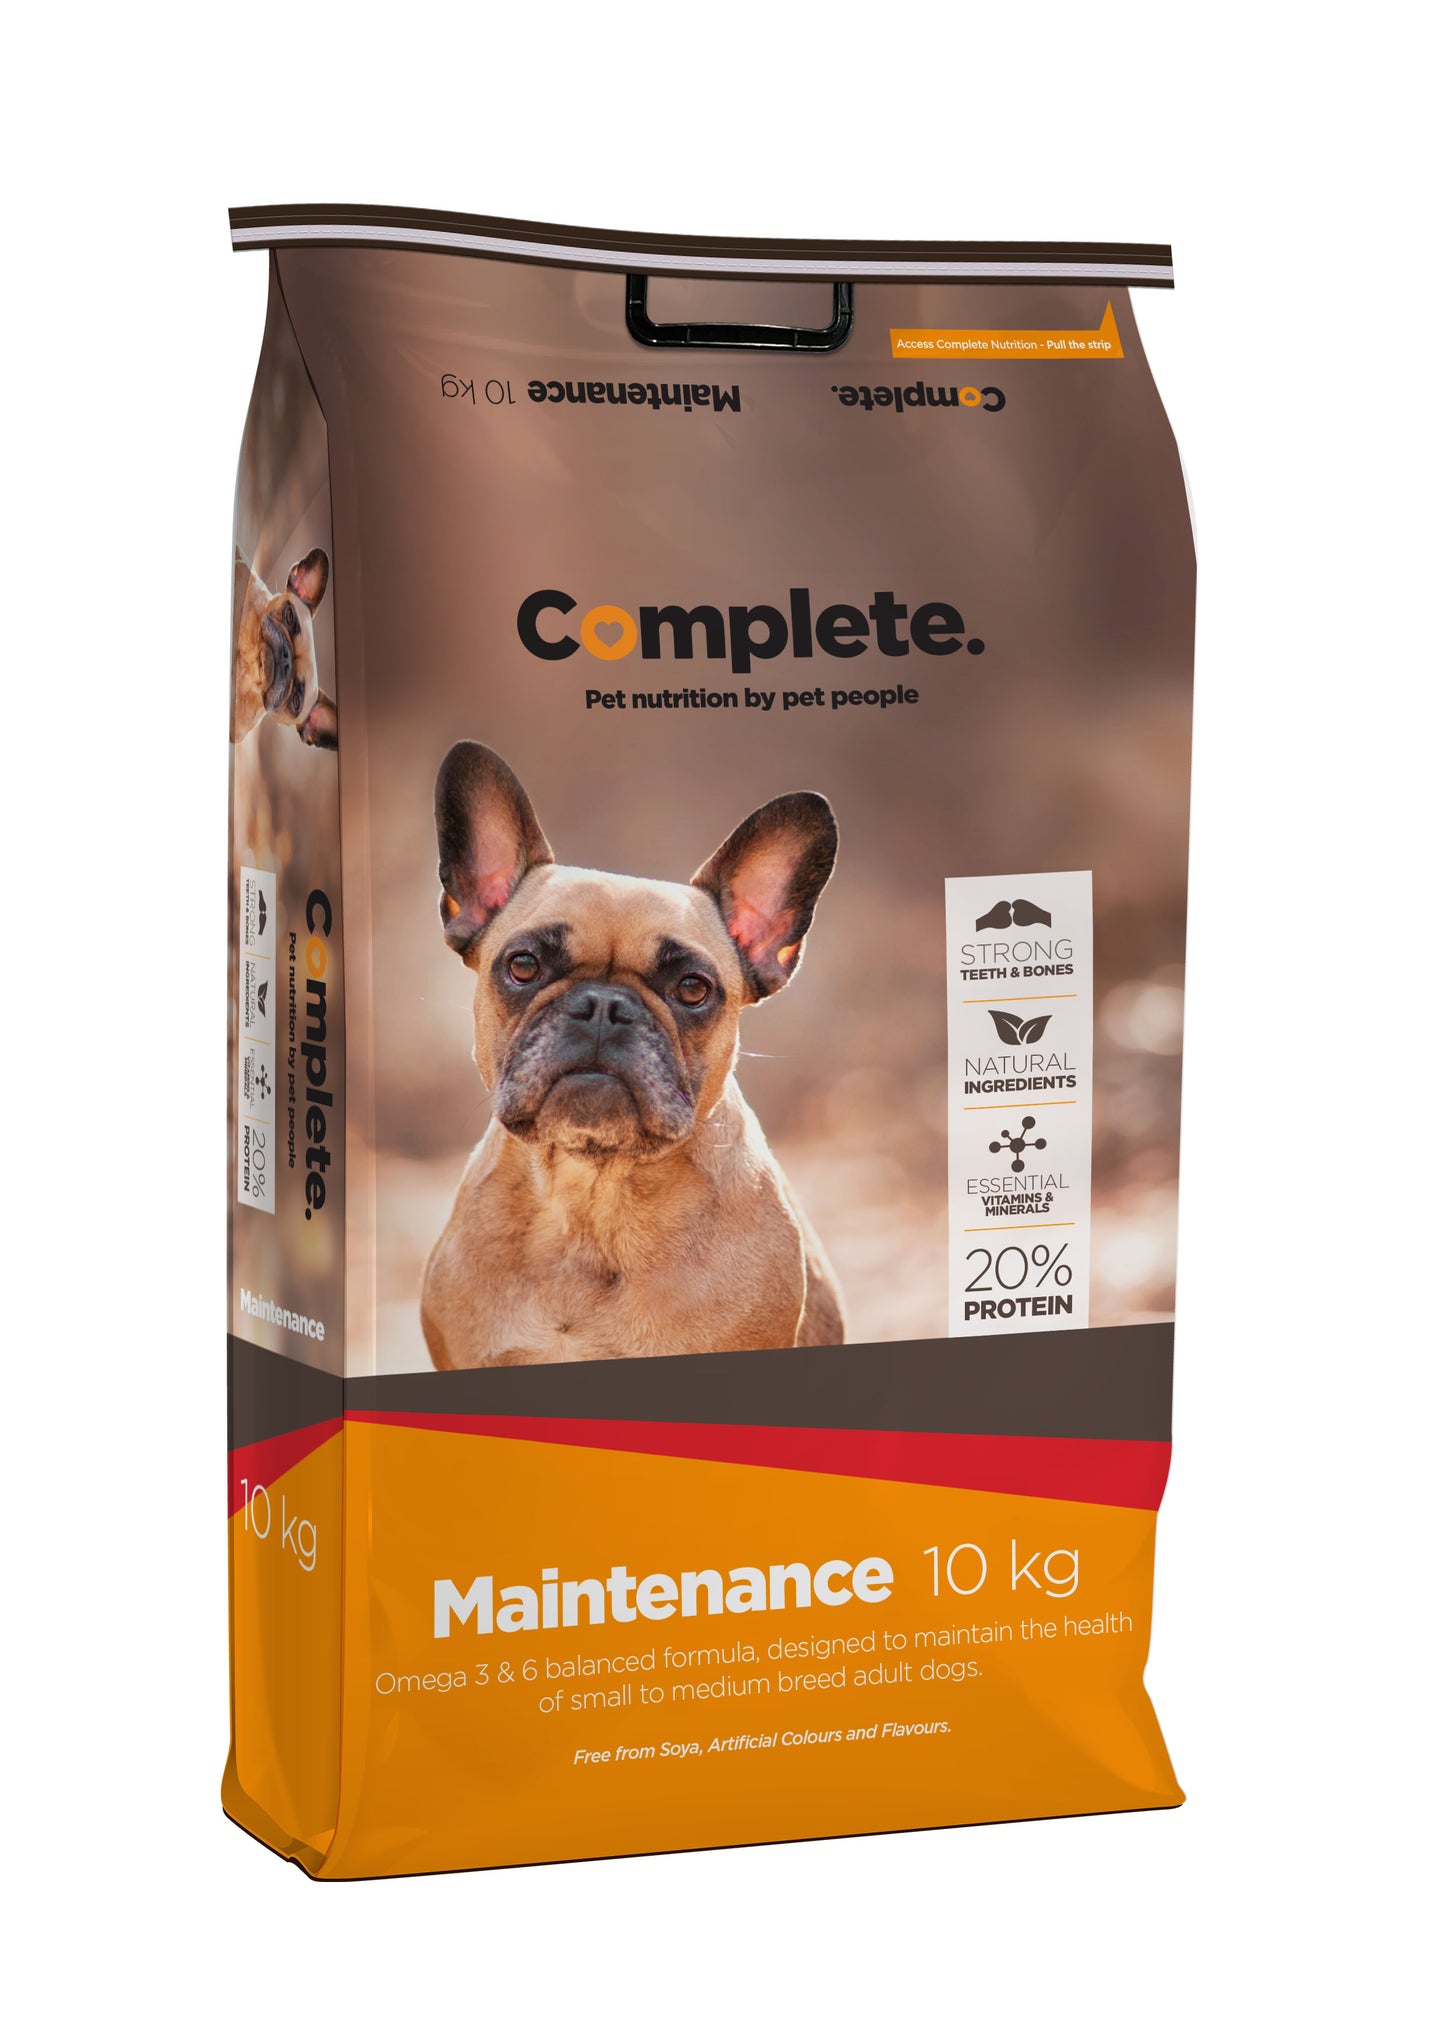 Maintenance 10kg Complete Pet Food For Small to Medium breed adult dogs from Pets Planet - South Africa’s Best Online Pet Store for premium pet products, best pet store near me, Dog food, pet food, dog wet food, dog bed, dog beds, washable dog bed, takealot dog bed, Complete Pet Nutrition, Complete pet nutrition dog food, hills dog food, optimizor dog food, royal canin dog food, jock dog food, bobtail dog food, canine cuisine, acana dog food, best dog food, dog food near me, best dog food brands